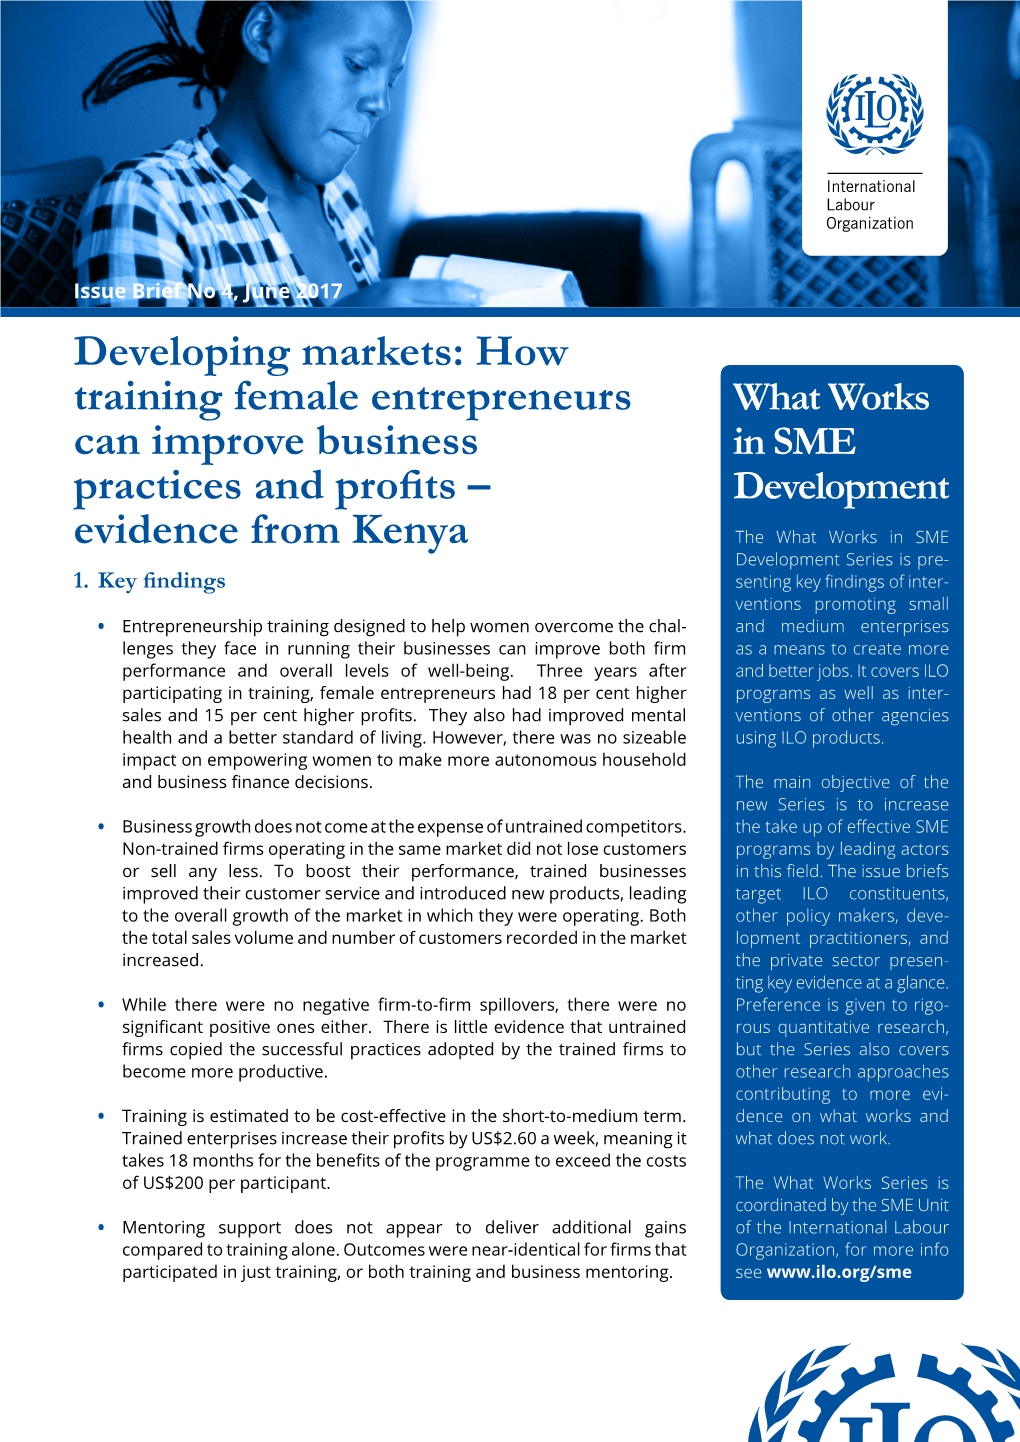 Developing Markets: How Training Female Entrepreneurs Can Improve Business Practices and Profits – Evidence from Kenya